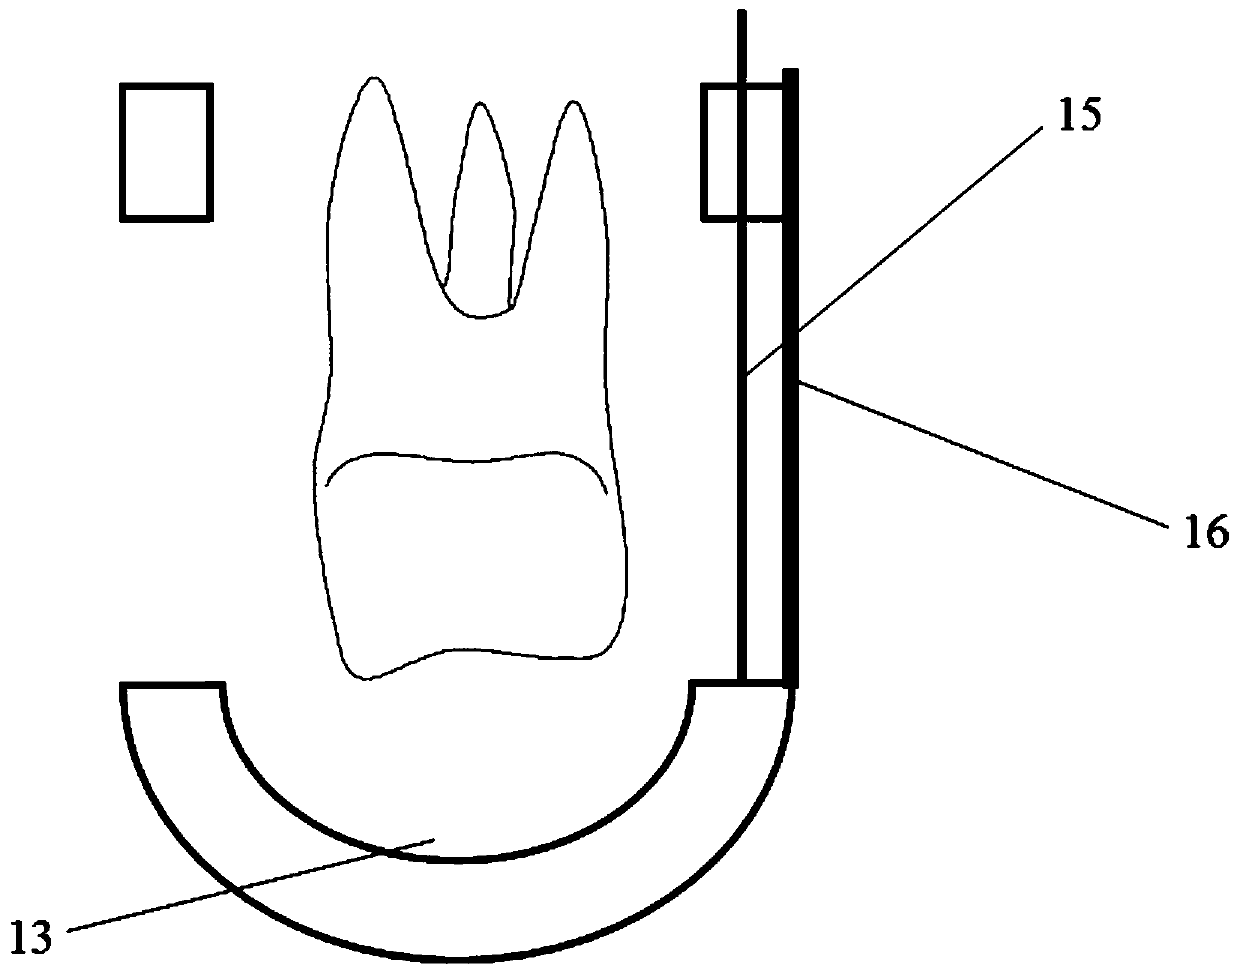 Partial tray combined dental film positioning and measuring device